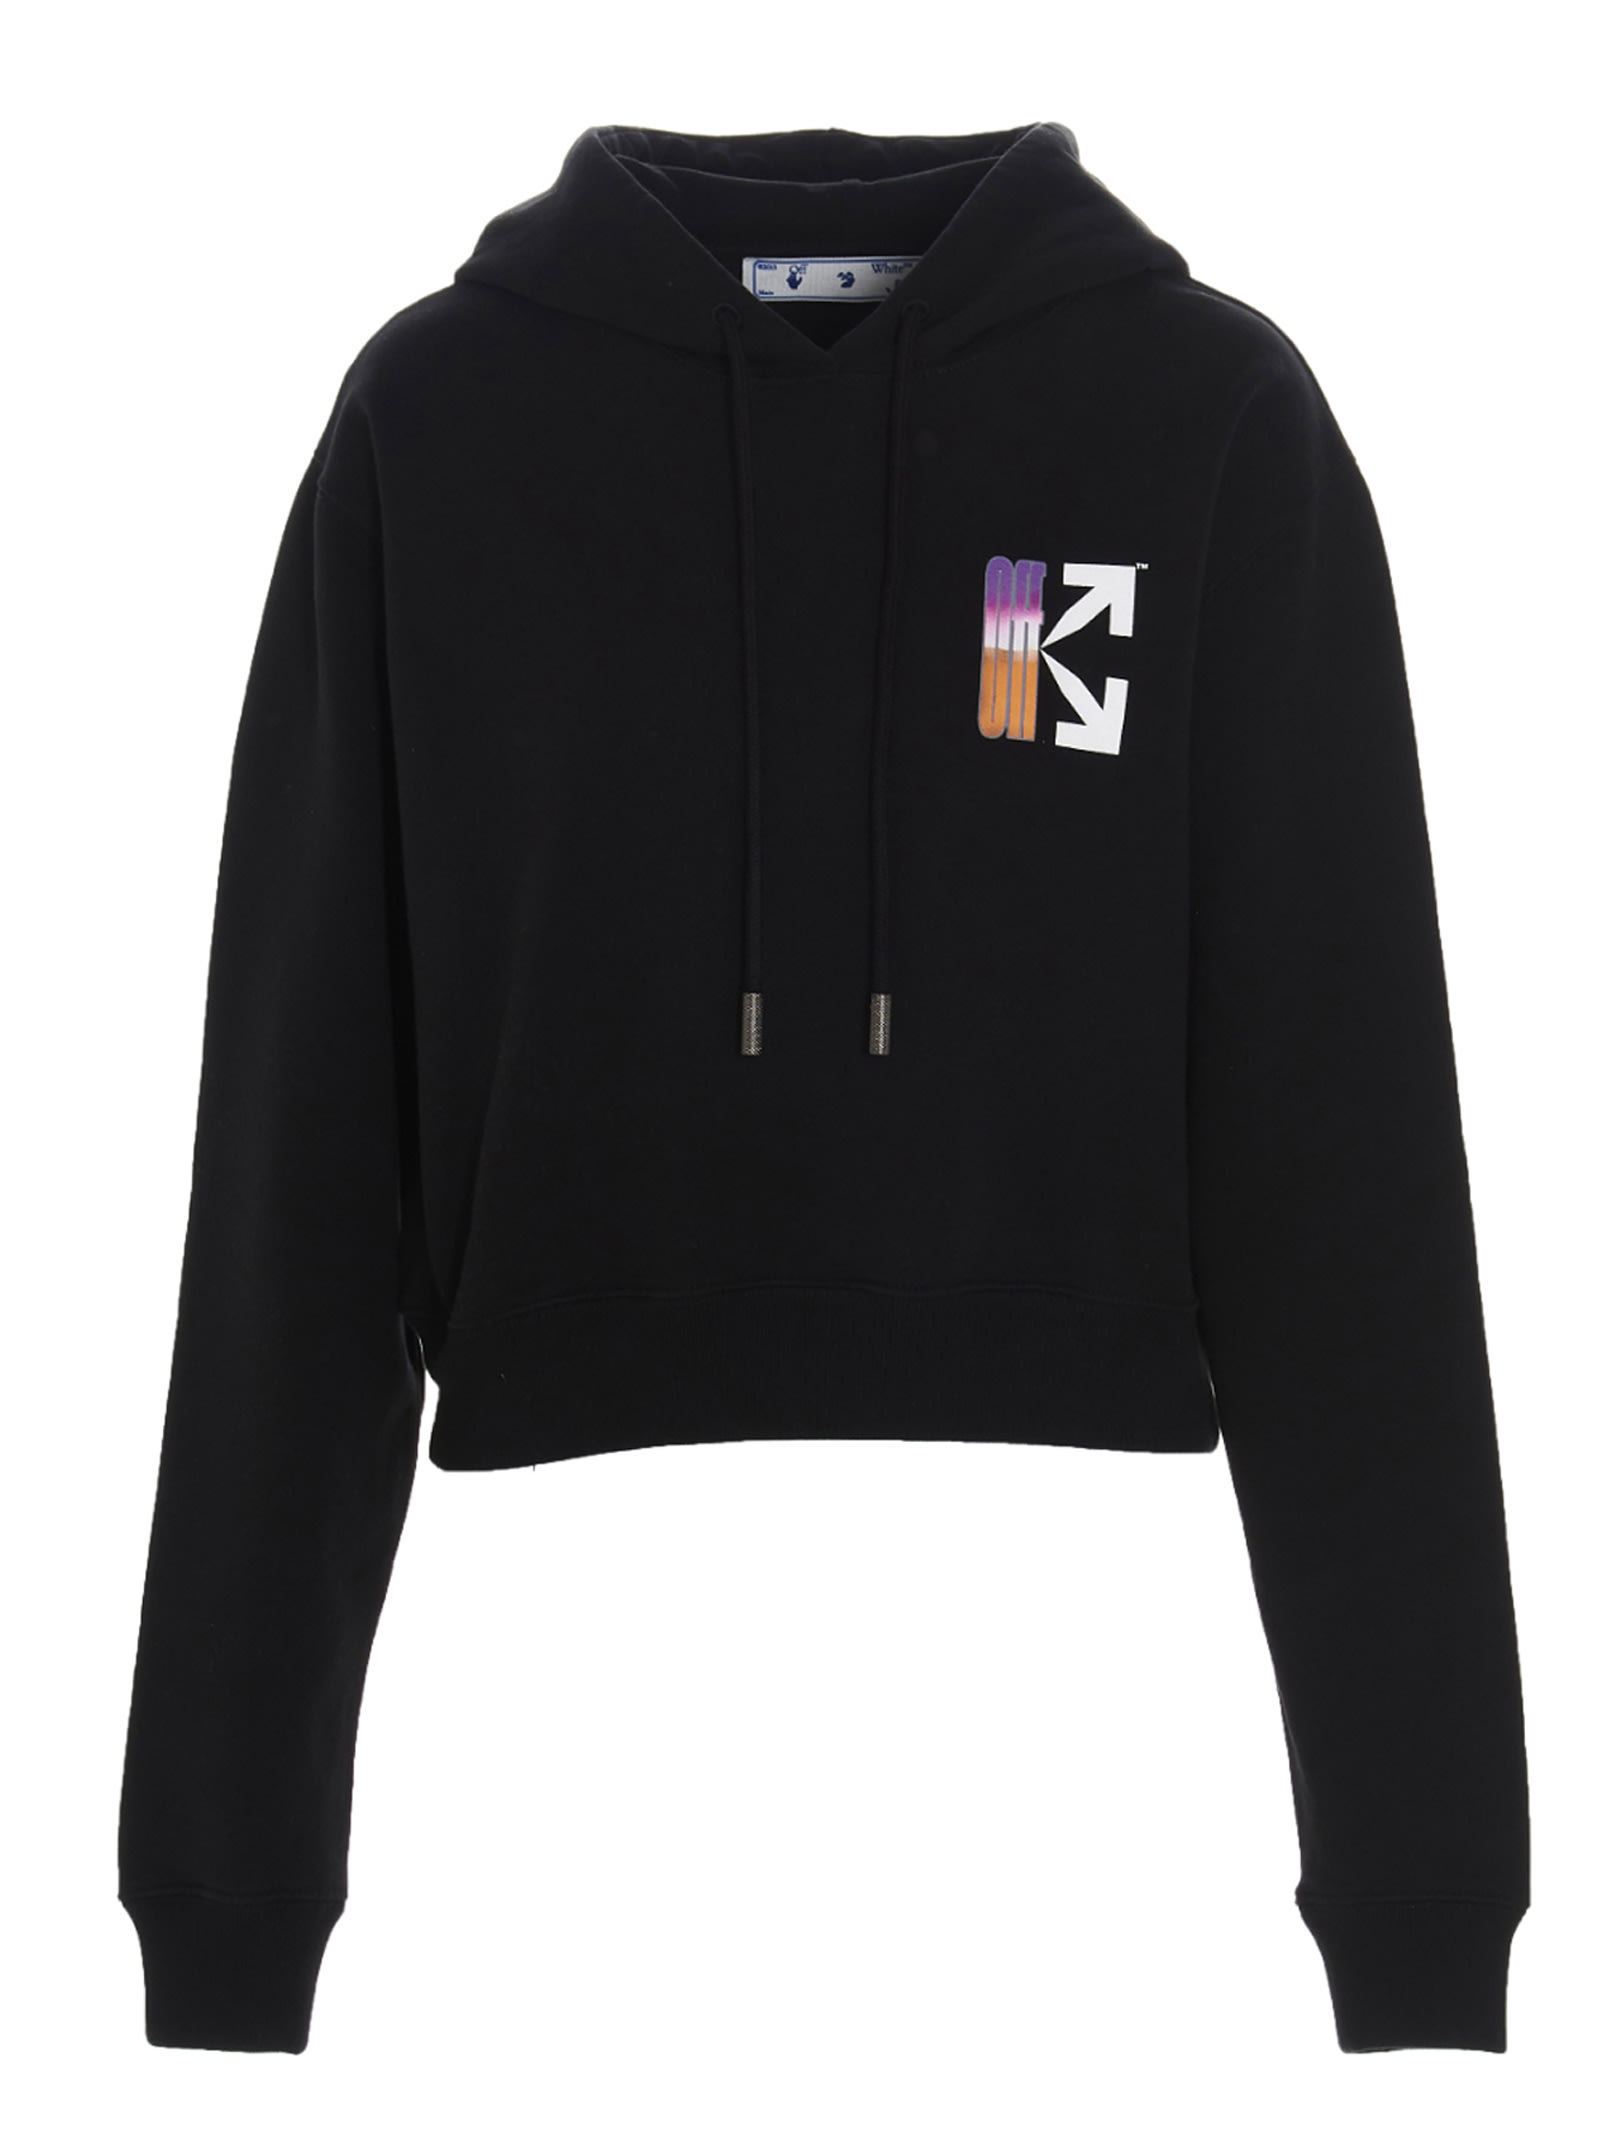 Off-white gradient Arrows Sweater